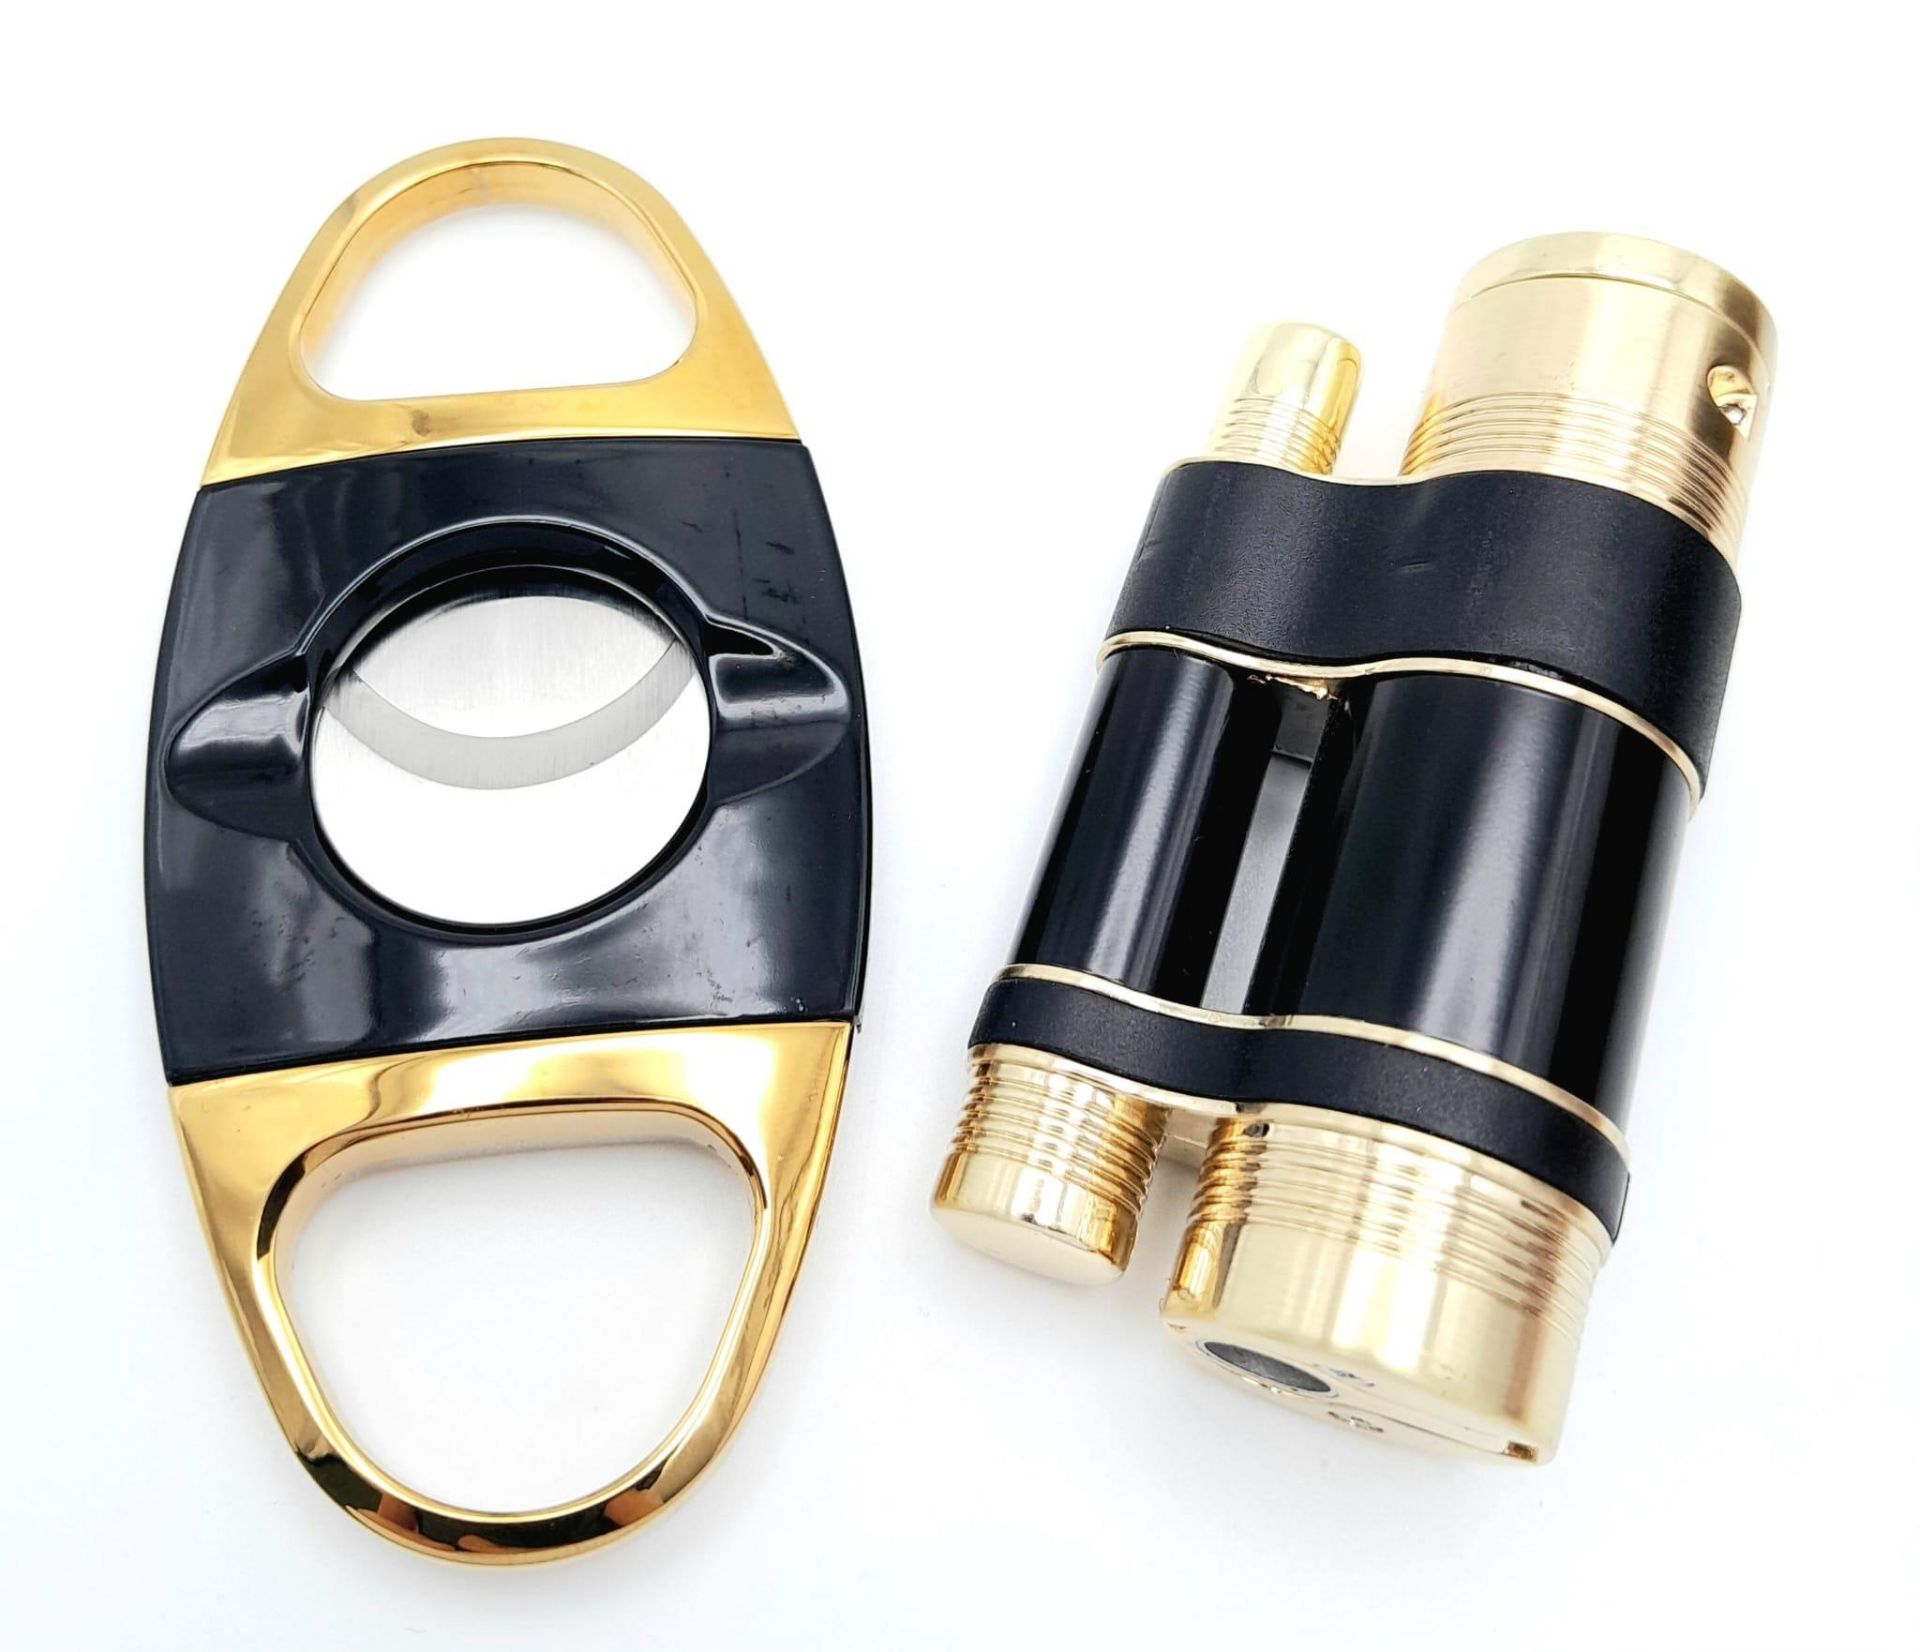 A highly collectable COHIBA lighter and cigar cutter set. This is a commemorative, limited edition - Image 3 of 6